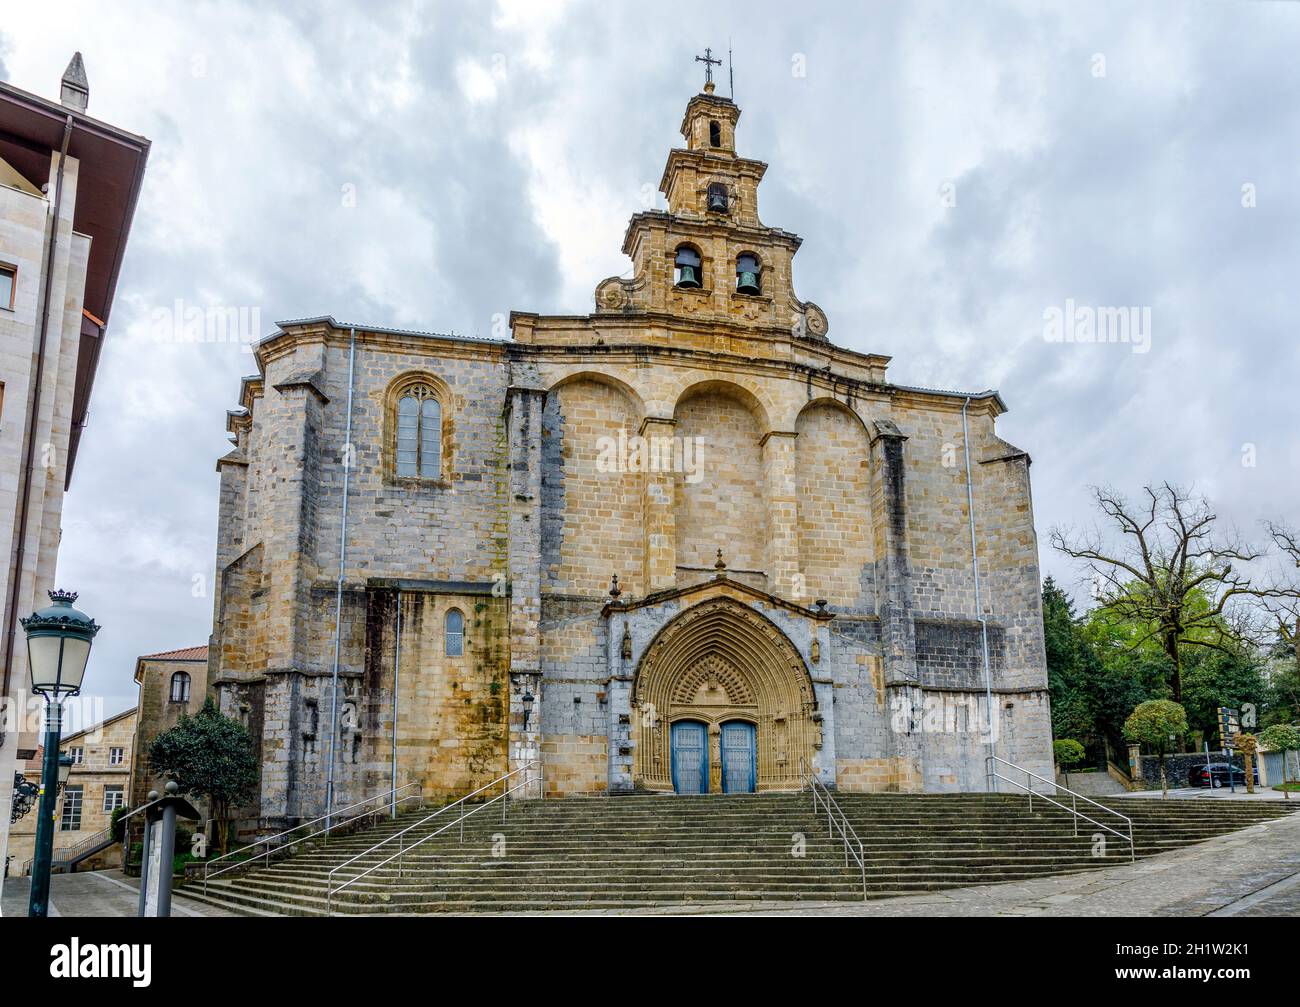 The Iglesia Santa Maria church in Gernika, a historic town in the province of Biscay (Bizkaya), Basque Country, Spain. Stock Photo